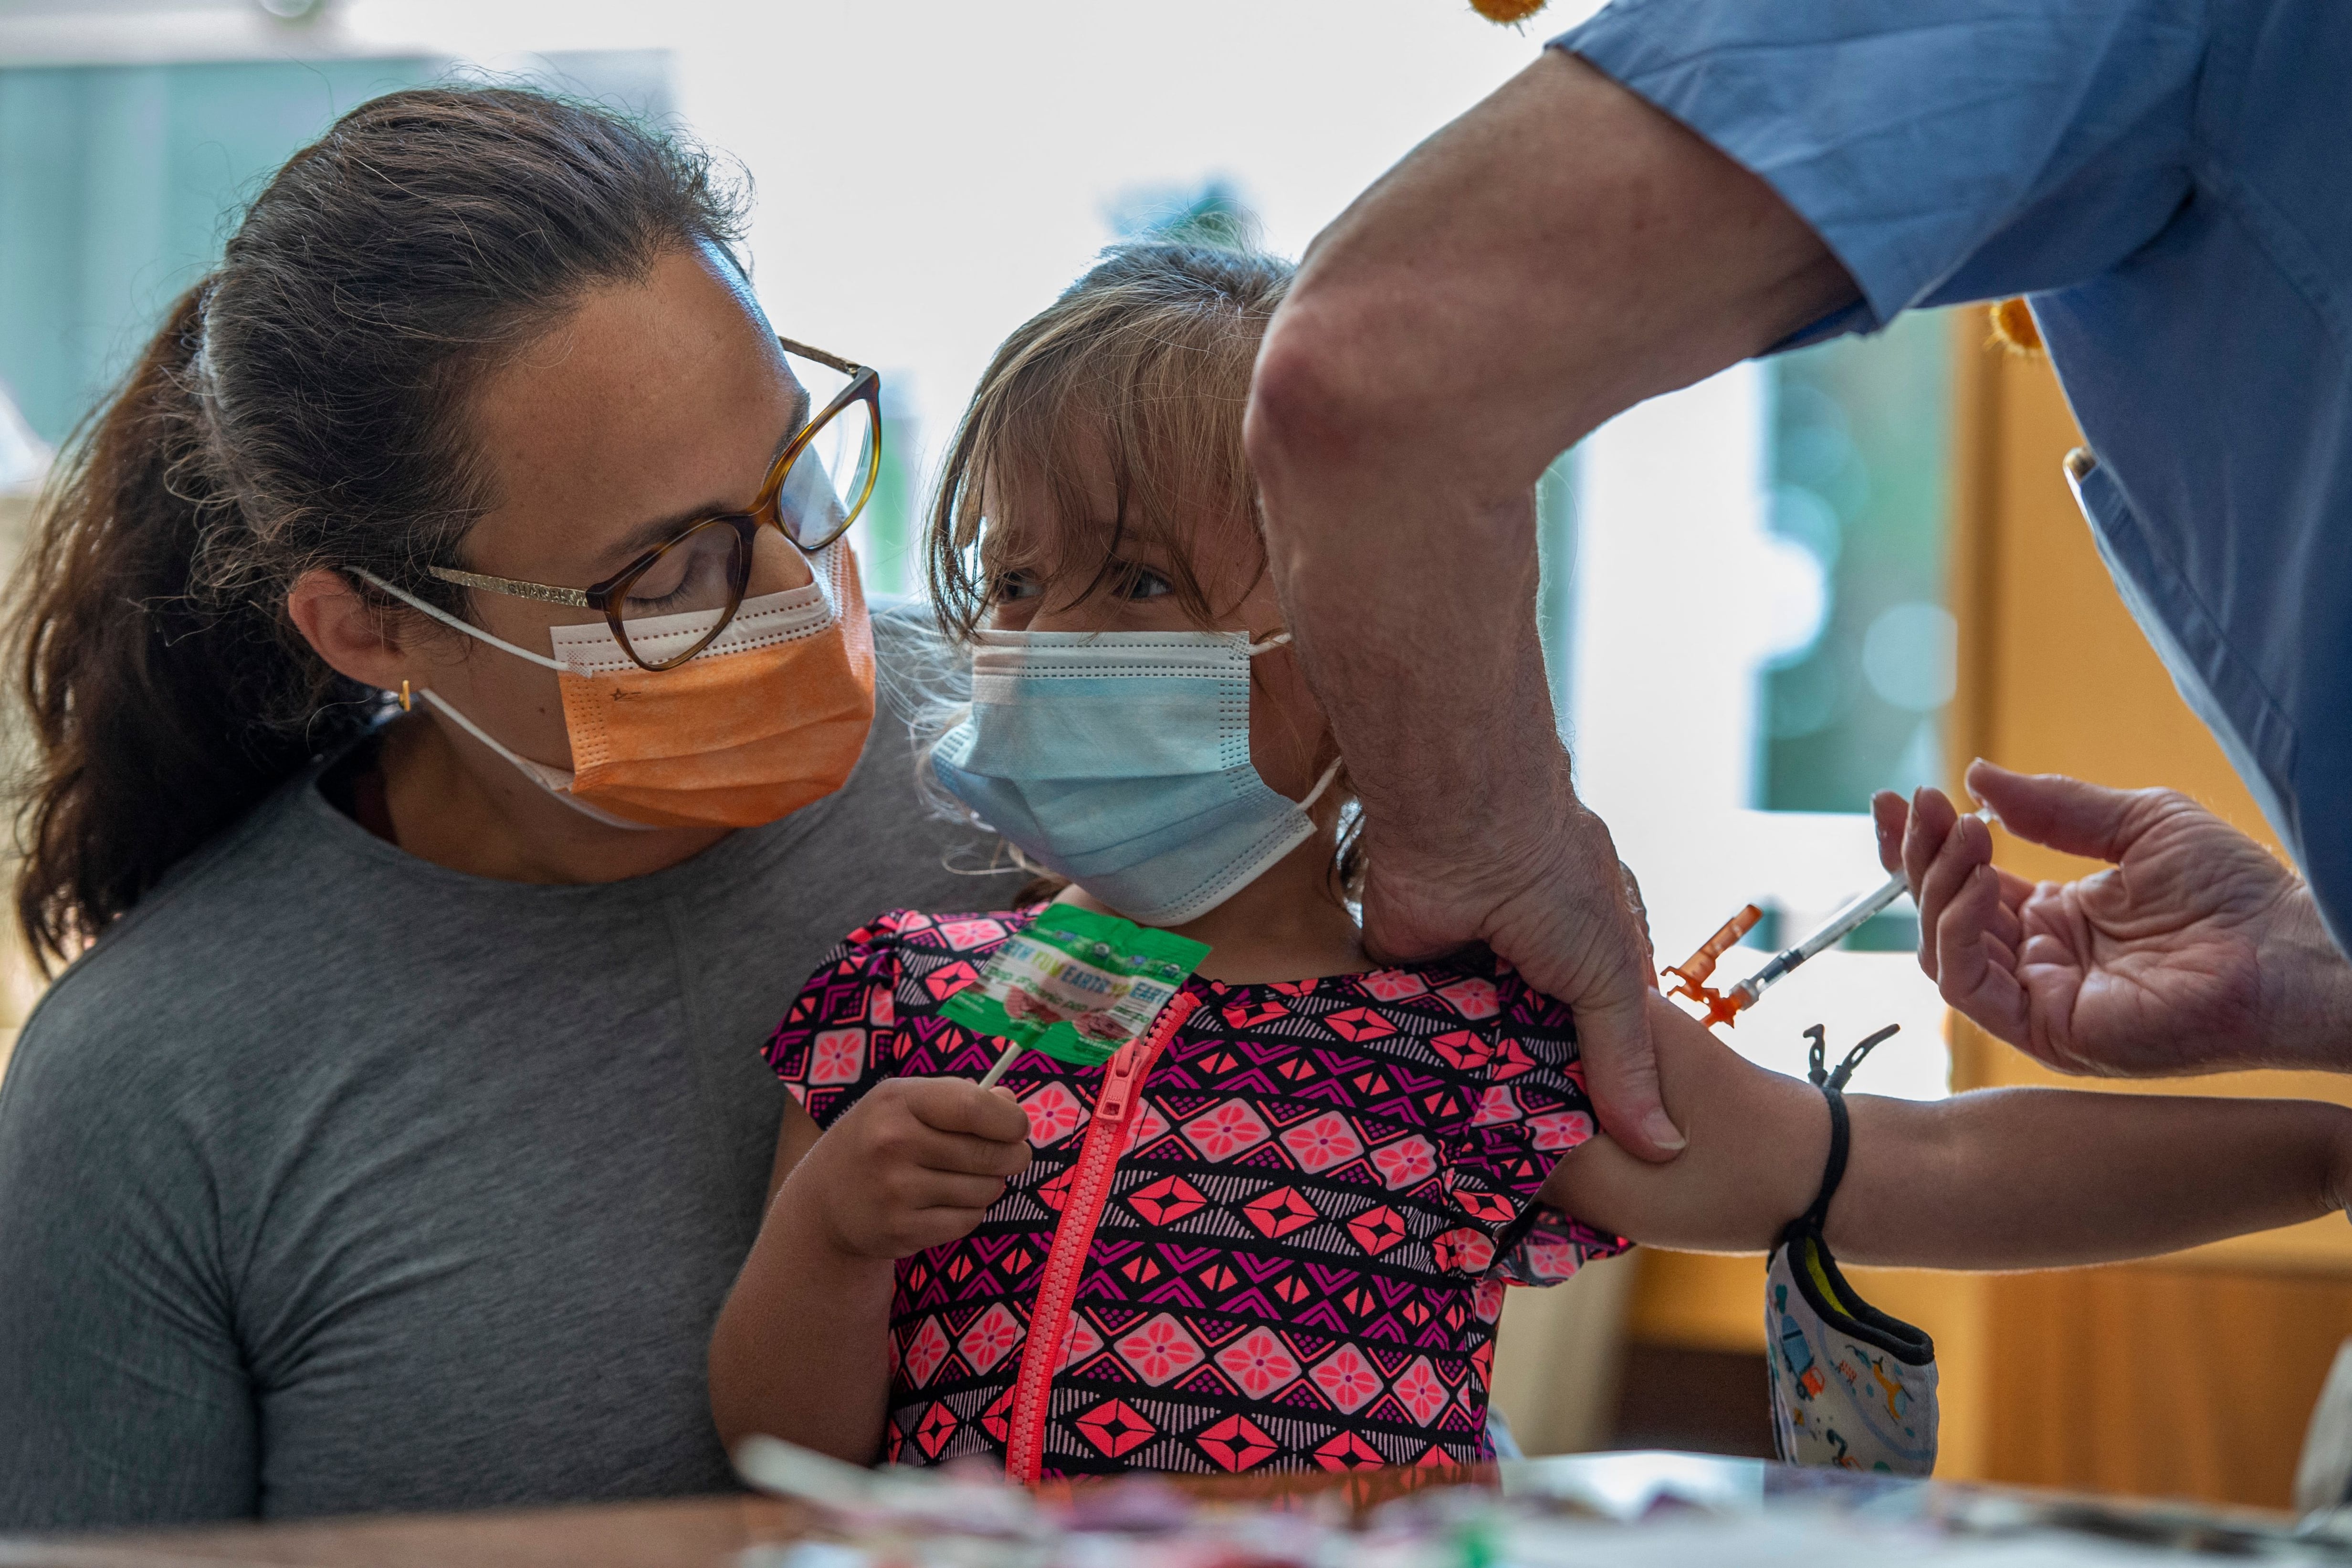 [From left to right] A woman in a gray shirt and orange mask holds a child in a pink and blue shirt who is receiving a shot. The child is holding a lollipop while a medical professional in blue gloves holds her right arm.